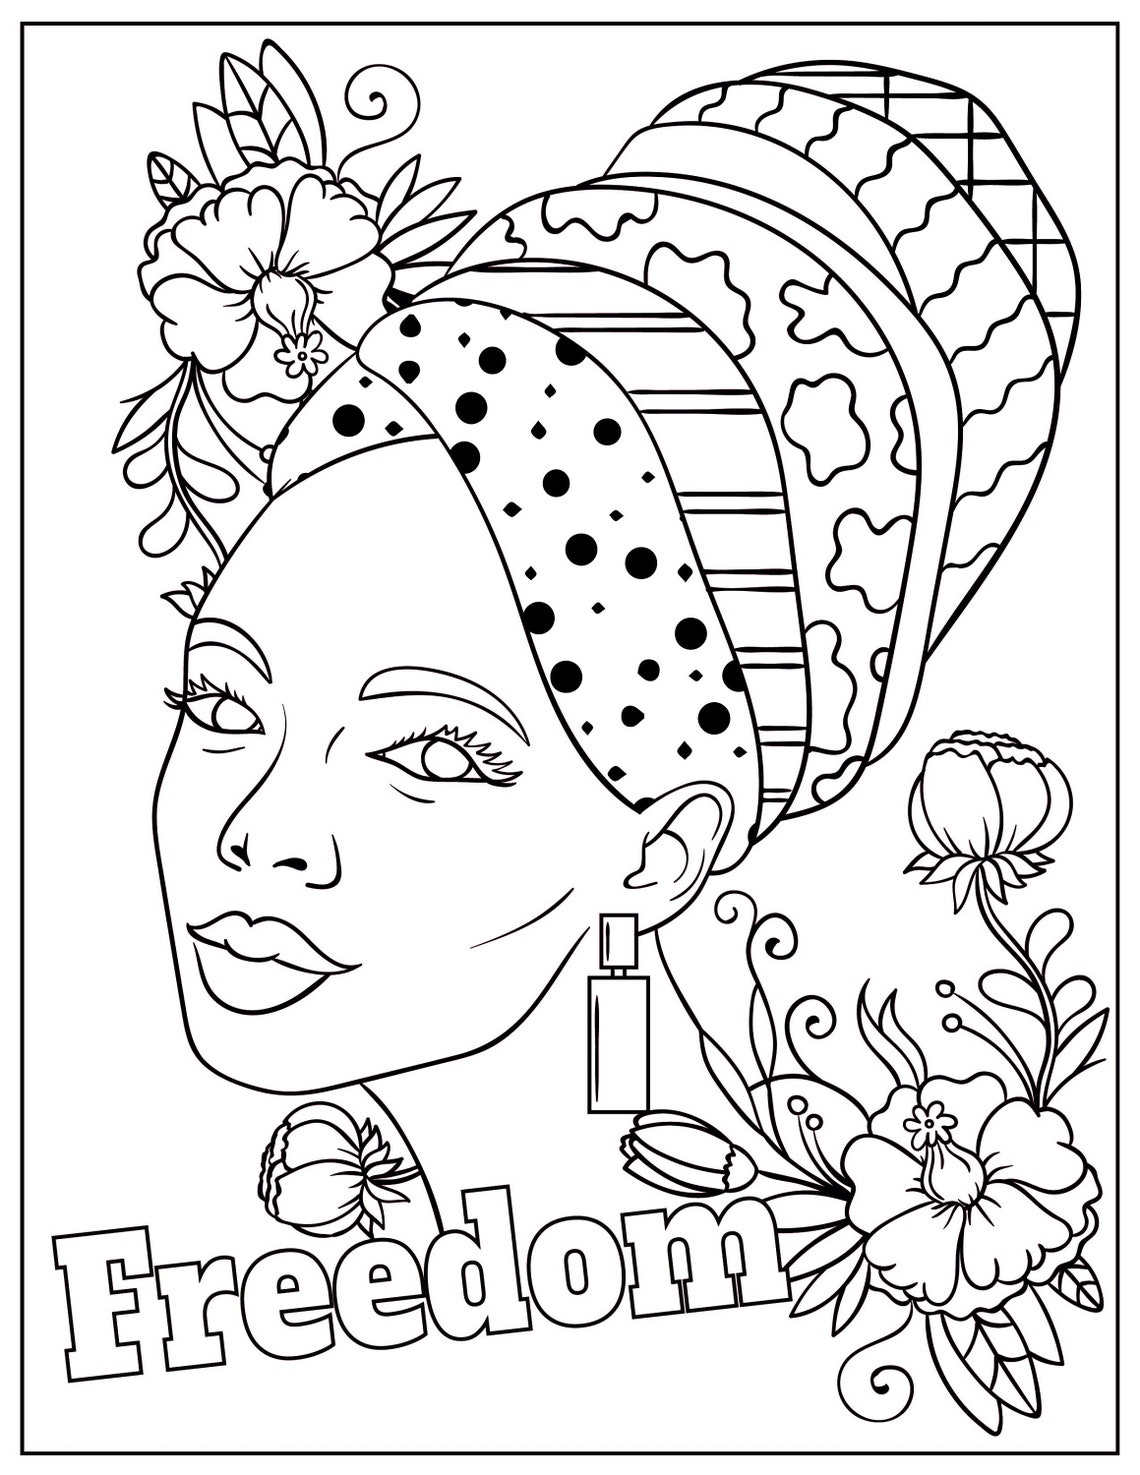 Freedom Coloring Page Printable Coloring Page Black Girl Coloring Pages ...